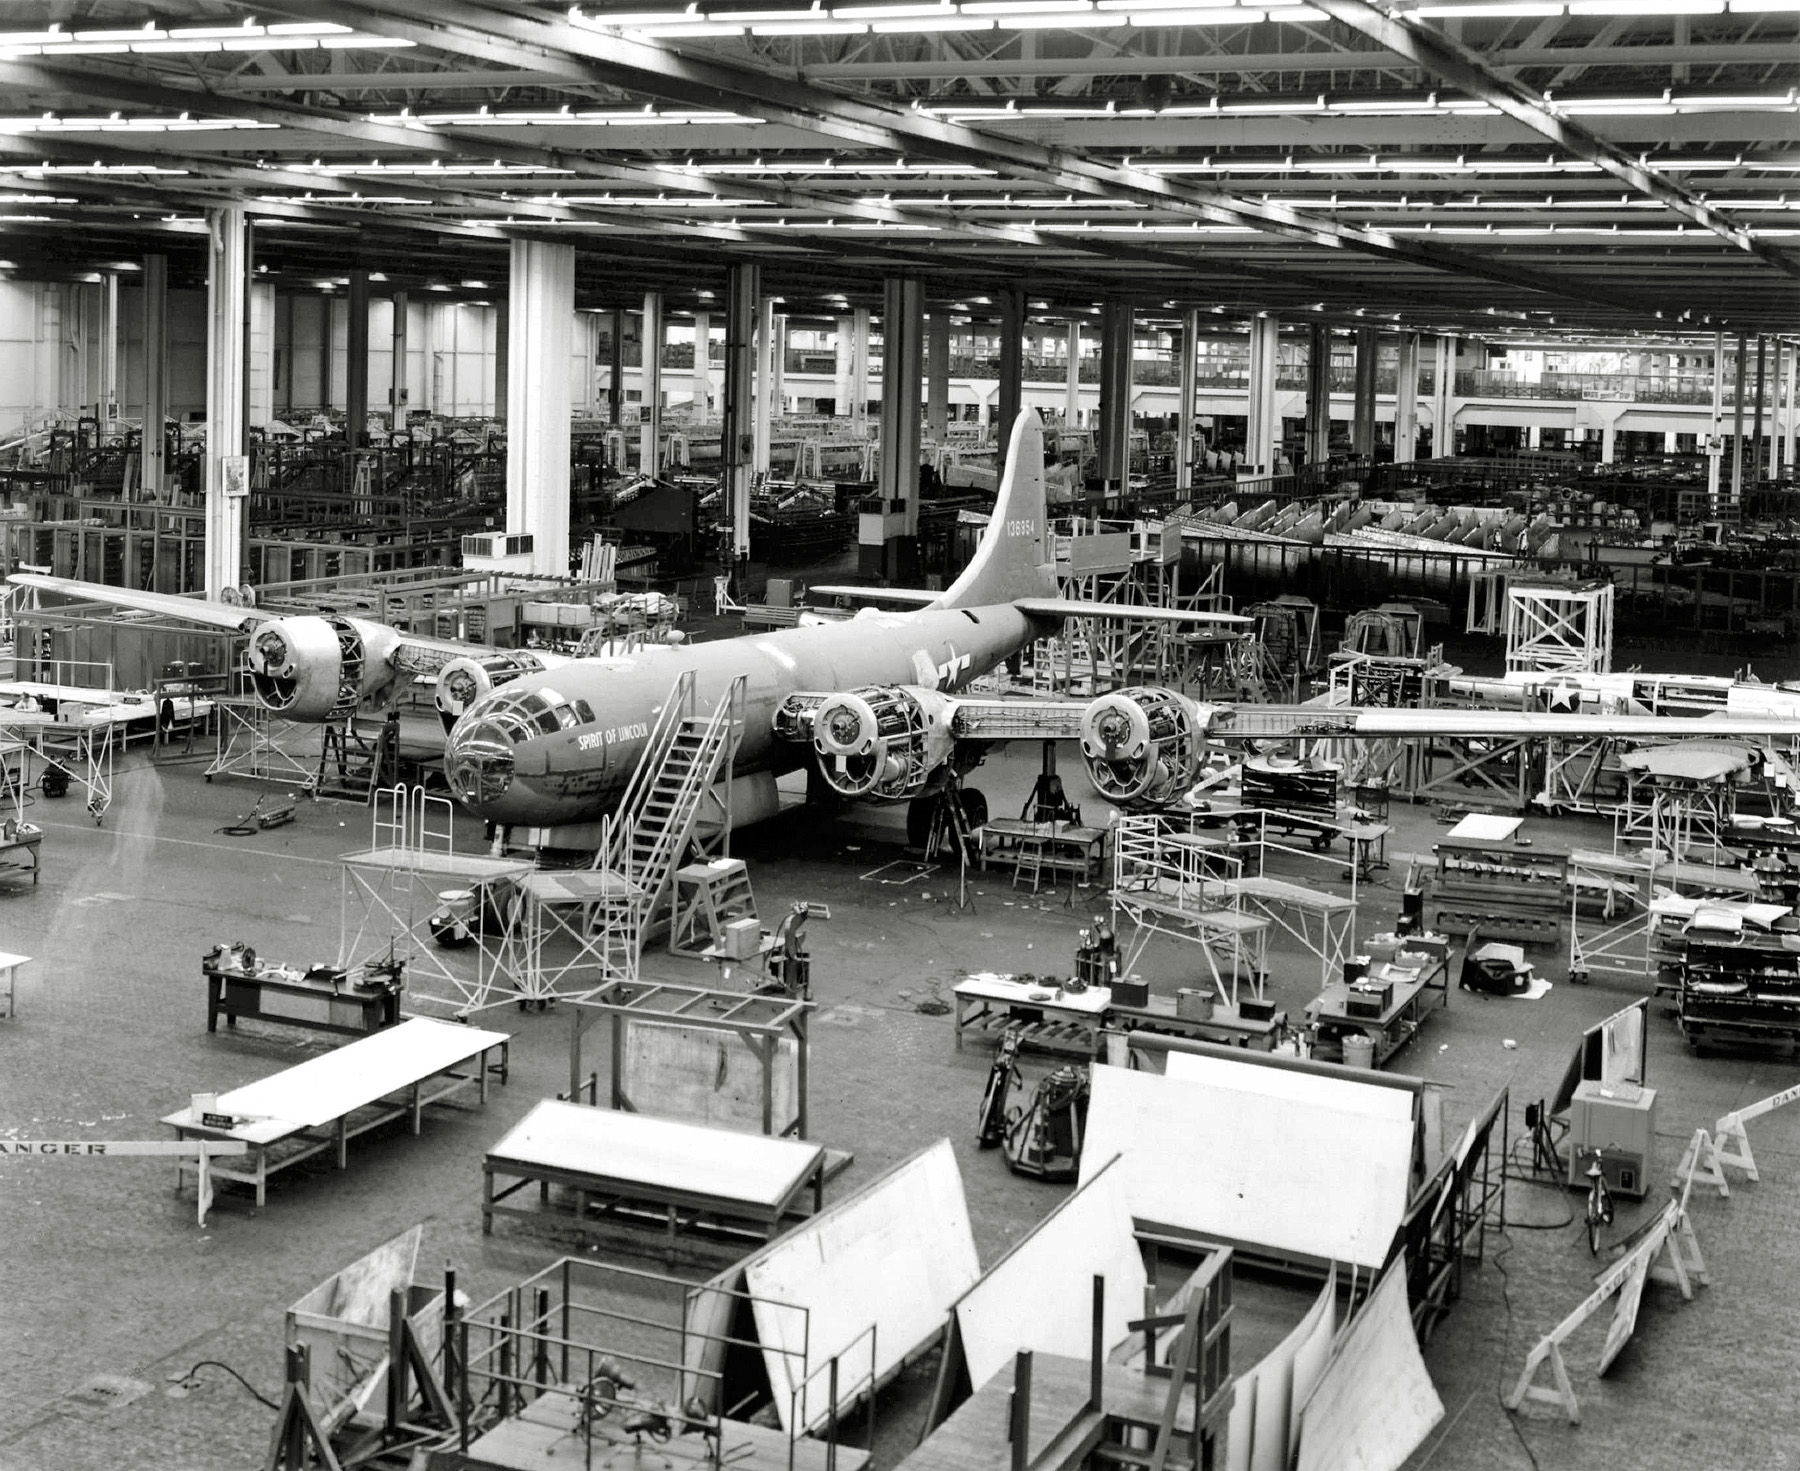 Retrofit of a B-29 Superfortress with Allison V-3420-11 inline engines at Cleveland Fisher Body plant circa 1944. View full size.